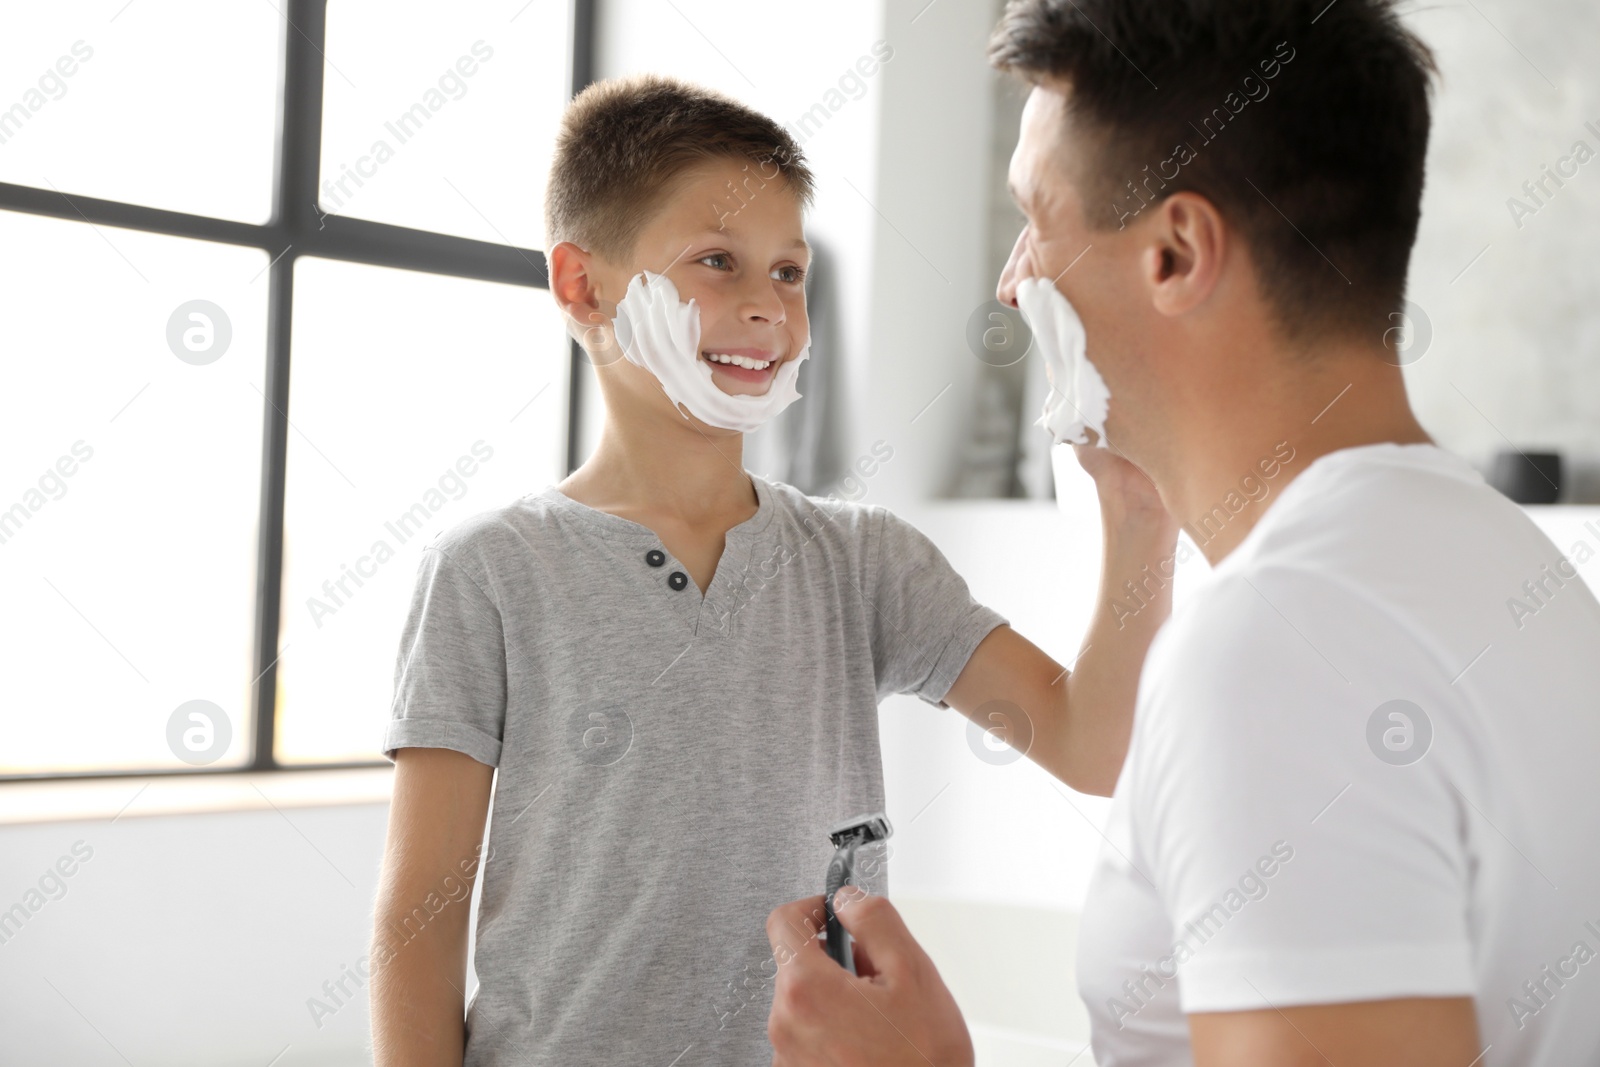 Photo of Son applying shaving foam onto father's face in bathroom